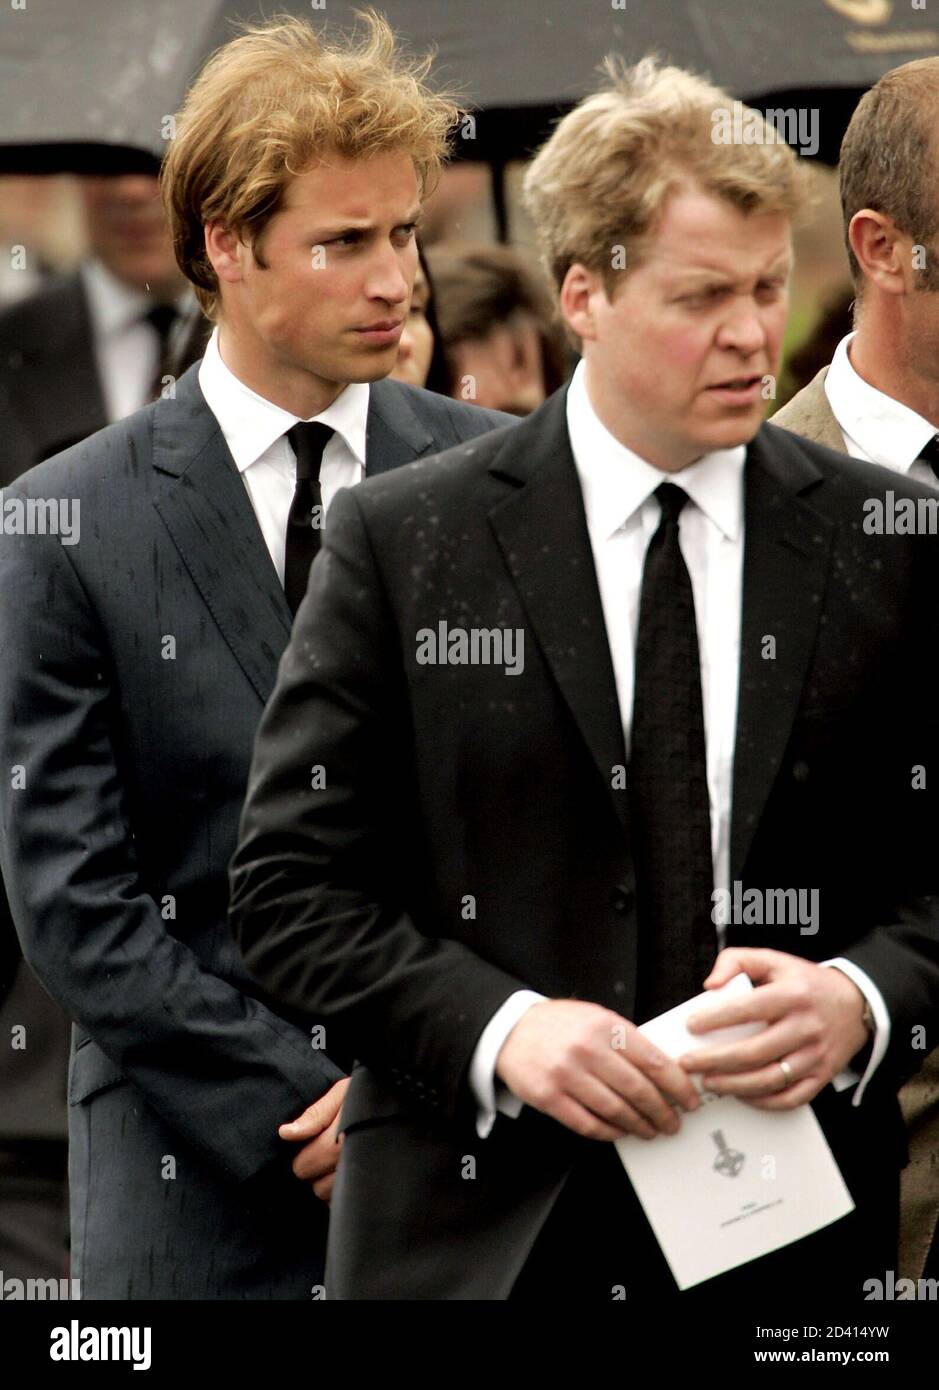 Britain's Prince William (L) and his uncle Earl Spencer (R) leave St  Columba's Cathedral after the funeral of Frances Shand Kydd in Oban in  Scotland, June 10, 2004. [Shand Kydd, mother of